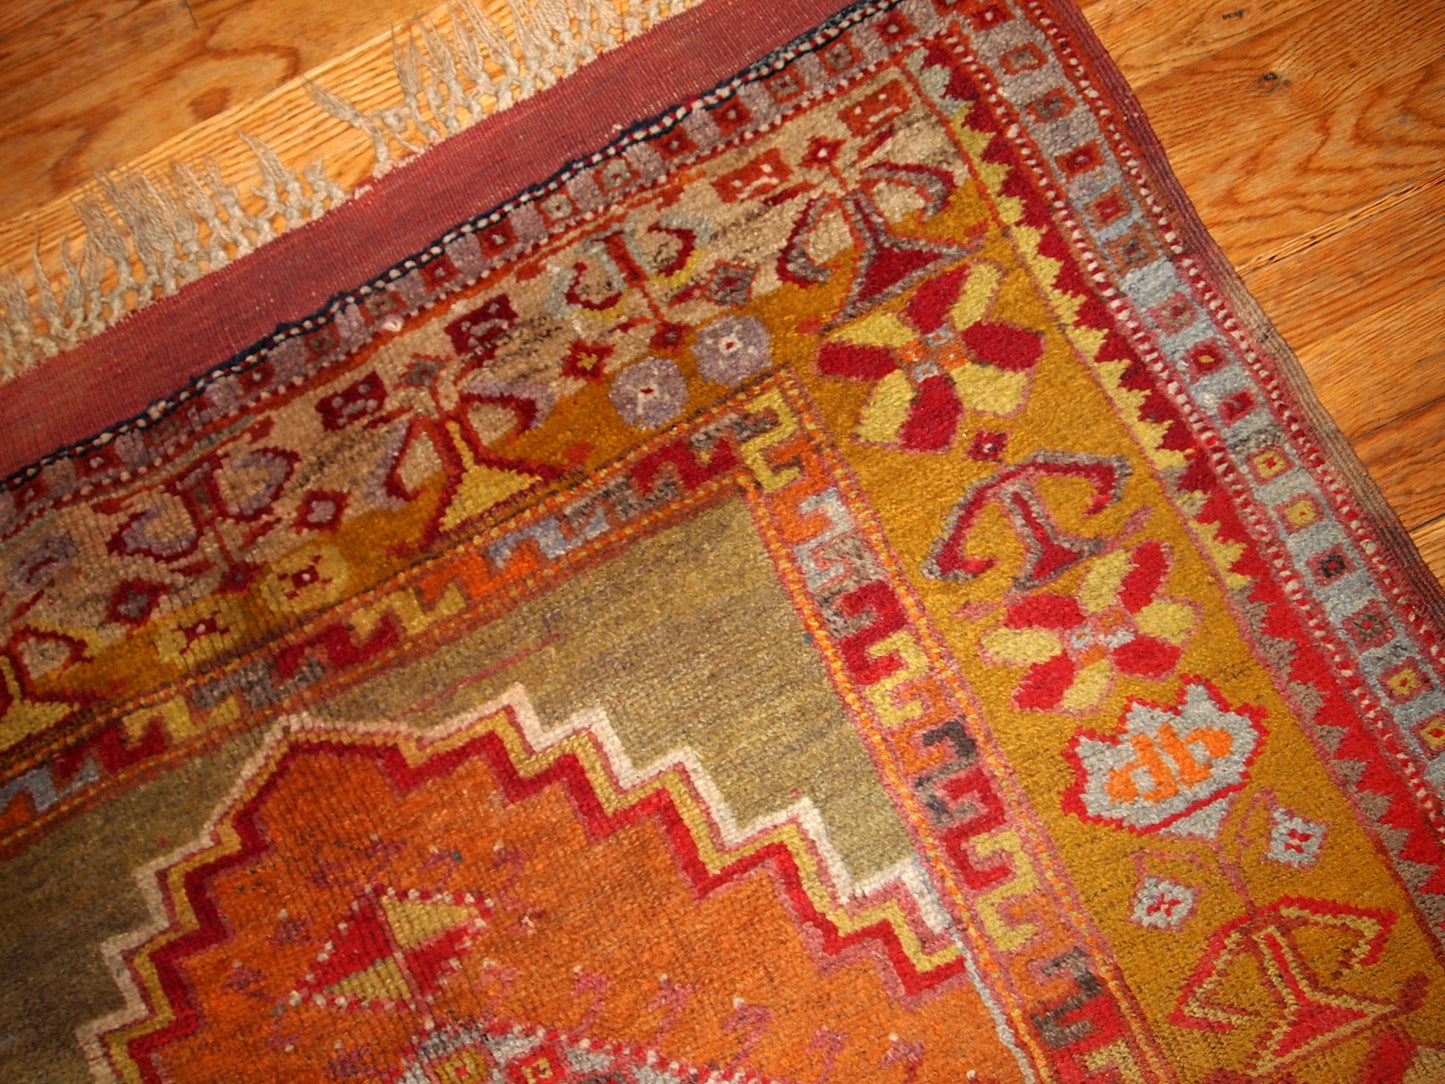 Antique Turkish Anatolian rug in soft tones of green, orange, red and brown.  The rug is from the beginning of 20th century and in original good condition.